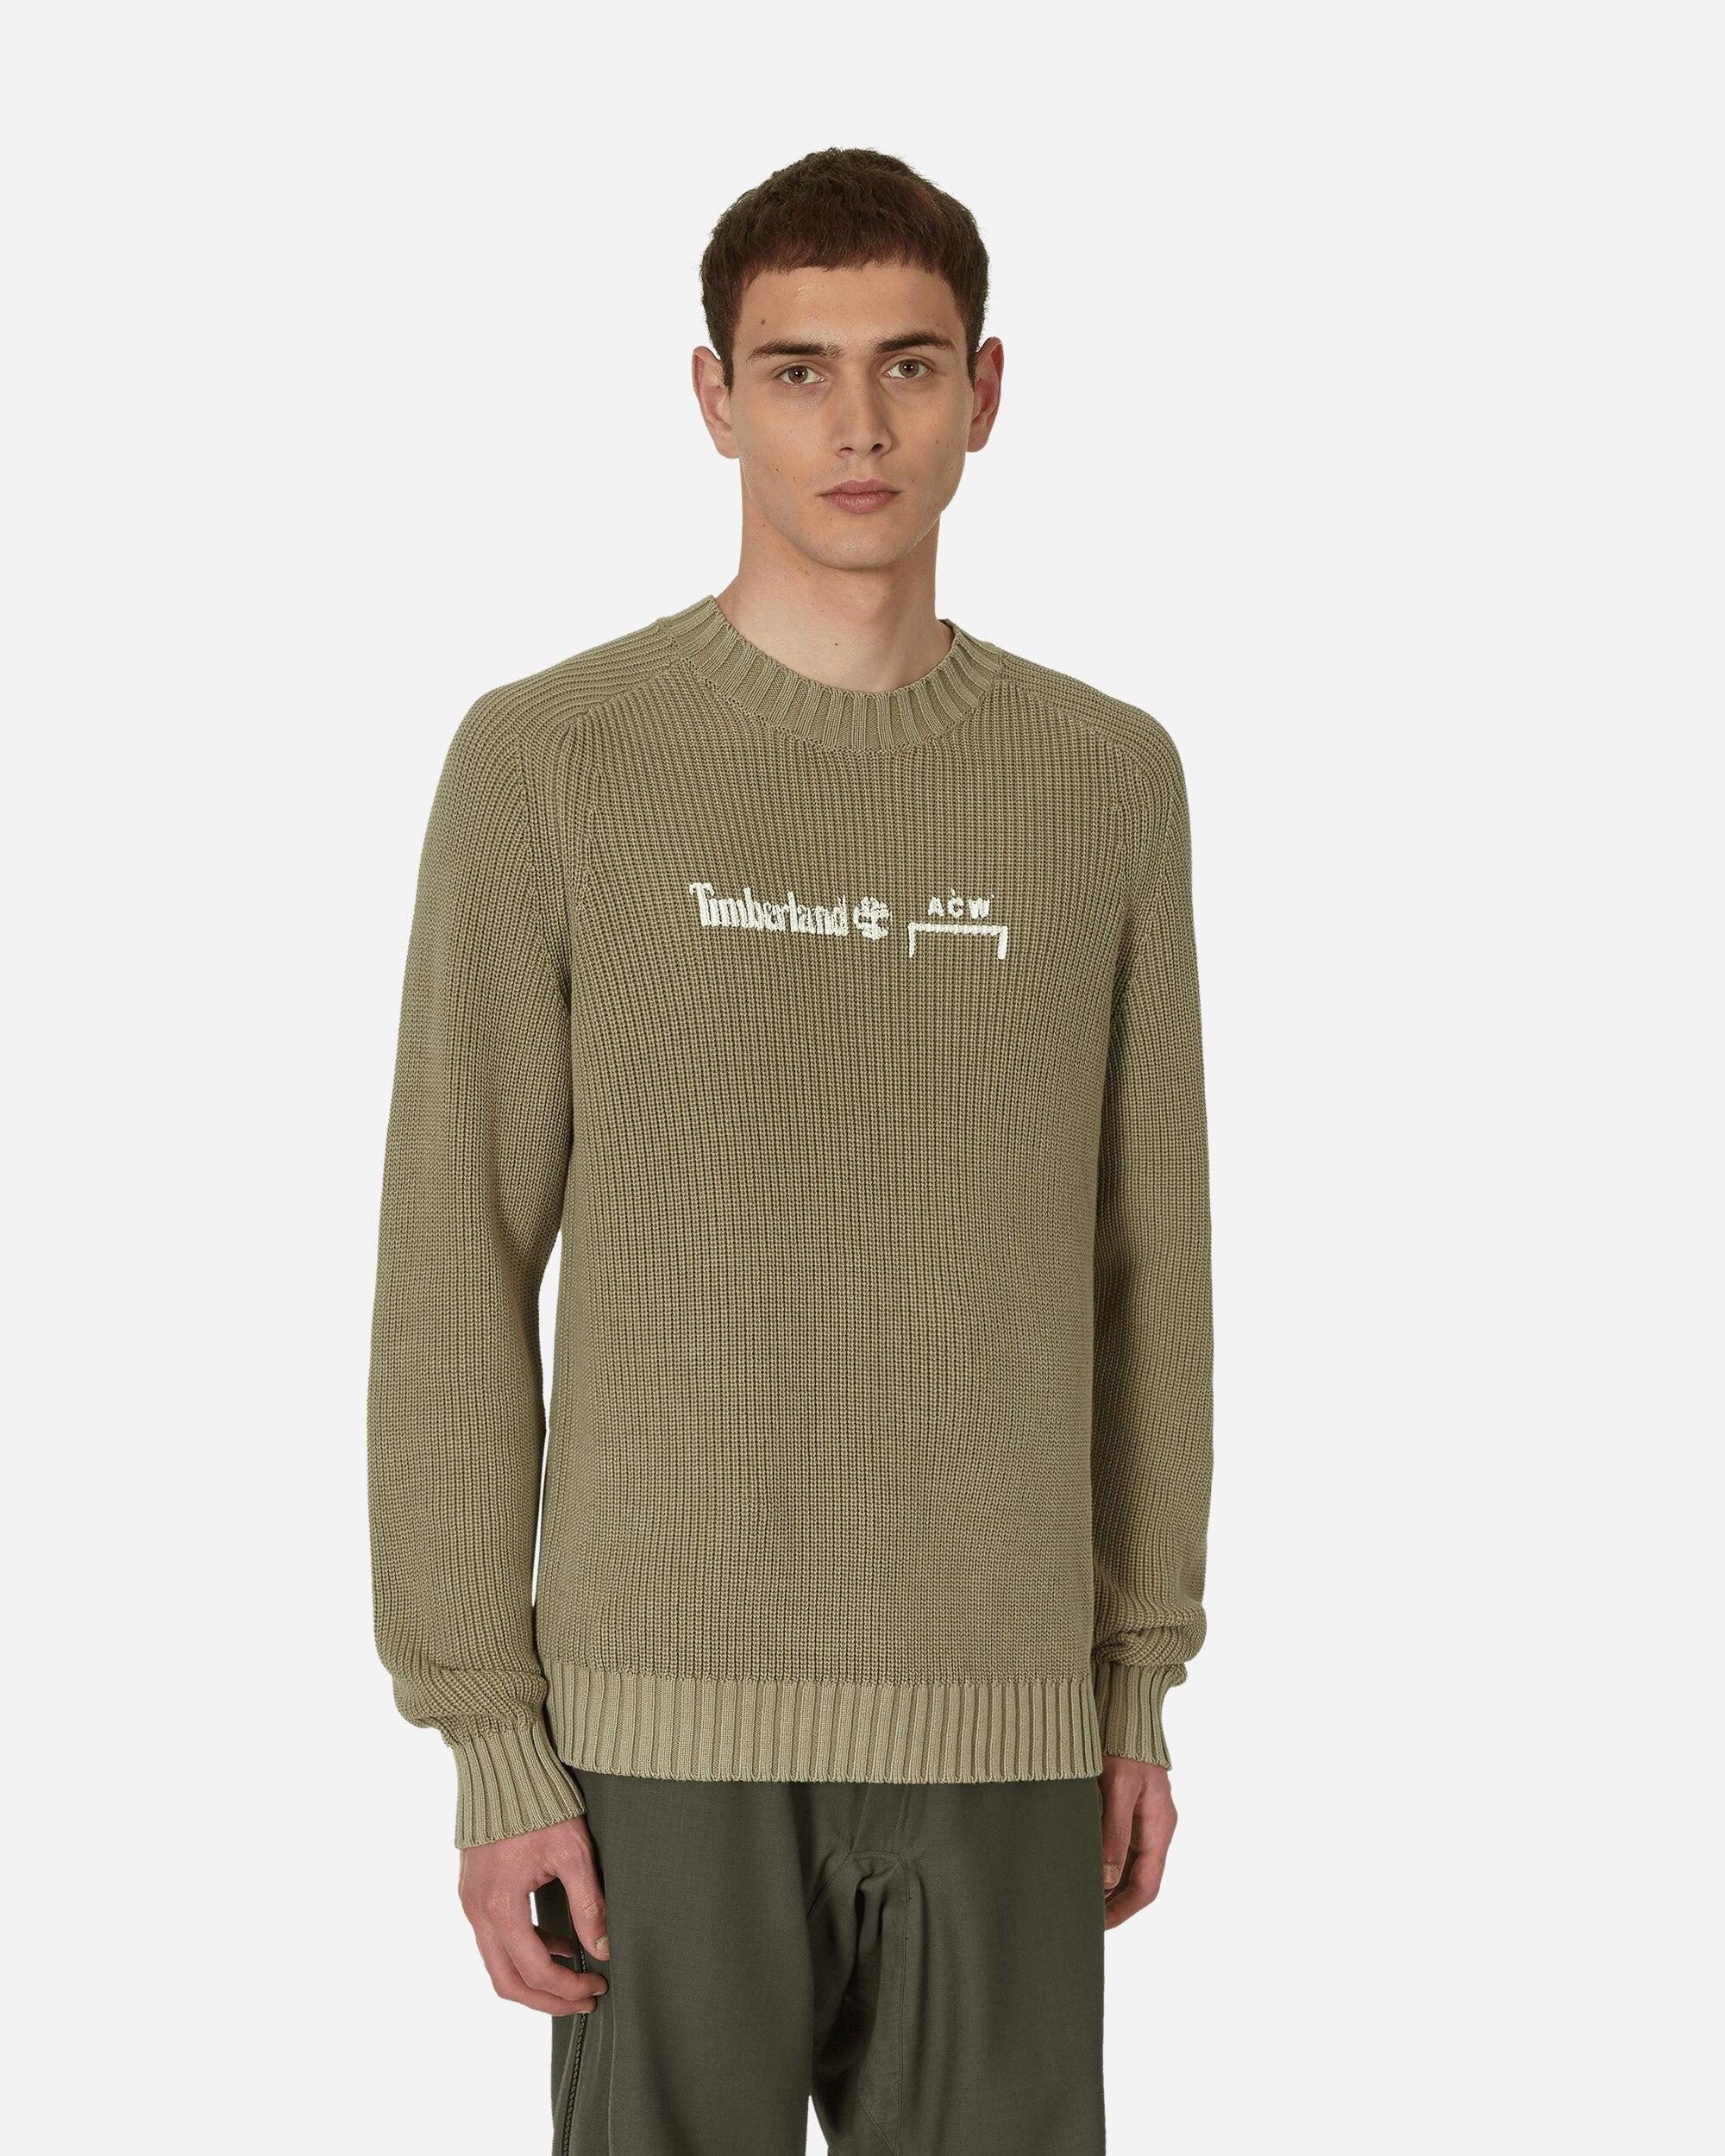 Timberland A-cold-wall* Future73 Fisherman Knit Sweater Lemon Pepper in  Green for Men | Lyst